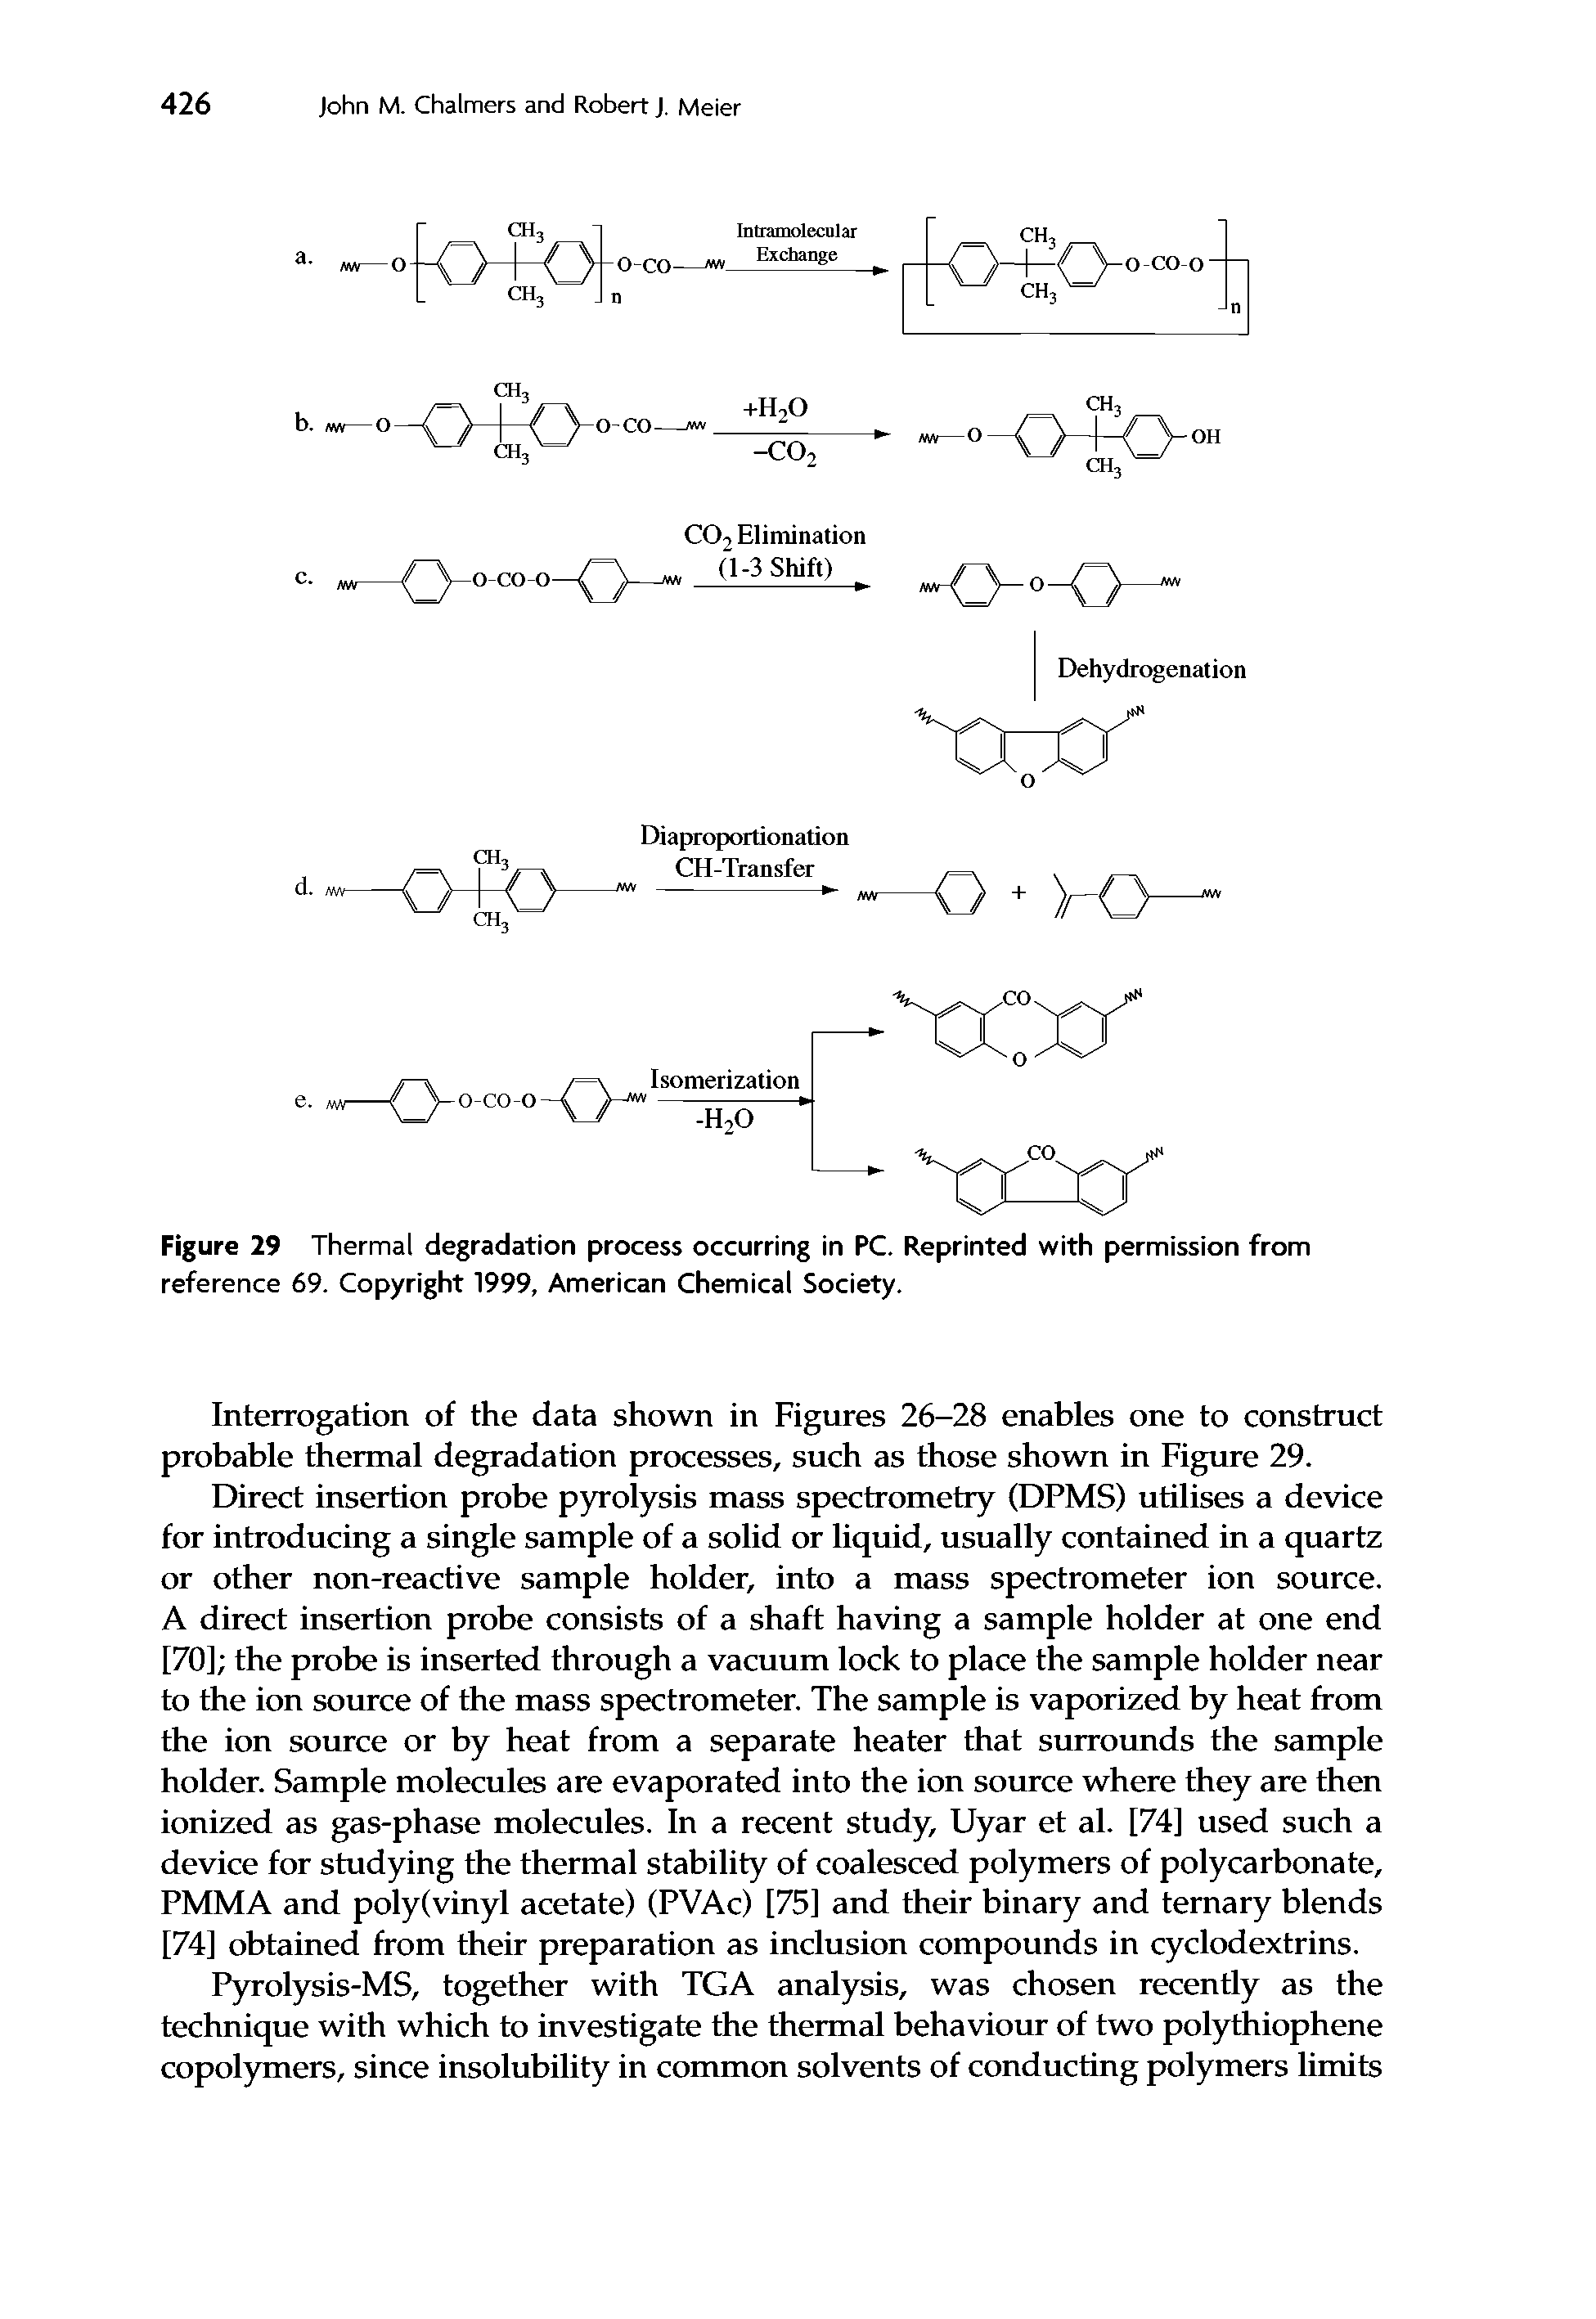 Figure 29 Thermal degradation process occurring in PC. Reprinted with permission from reference 69. Copyright 1999, American Chemical Society.